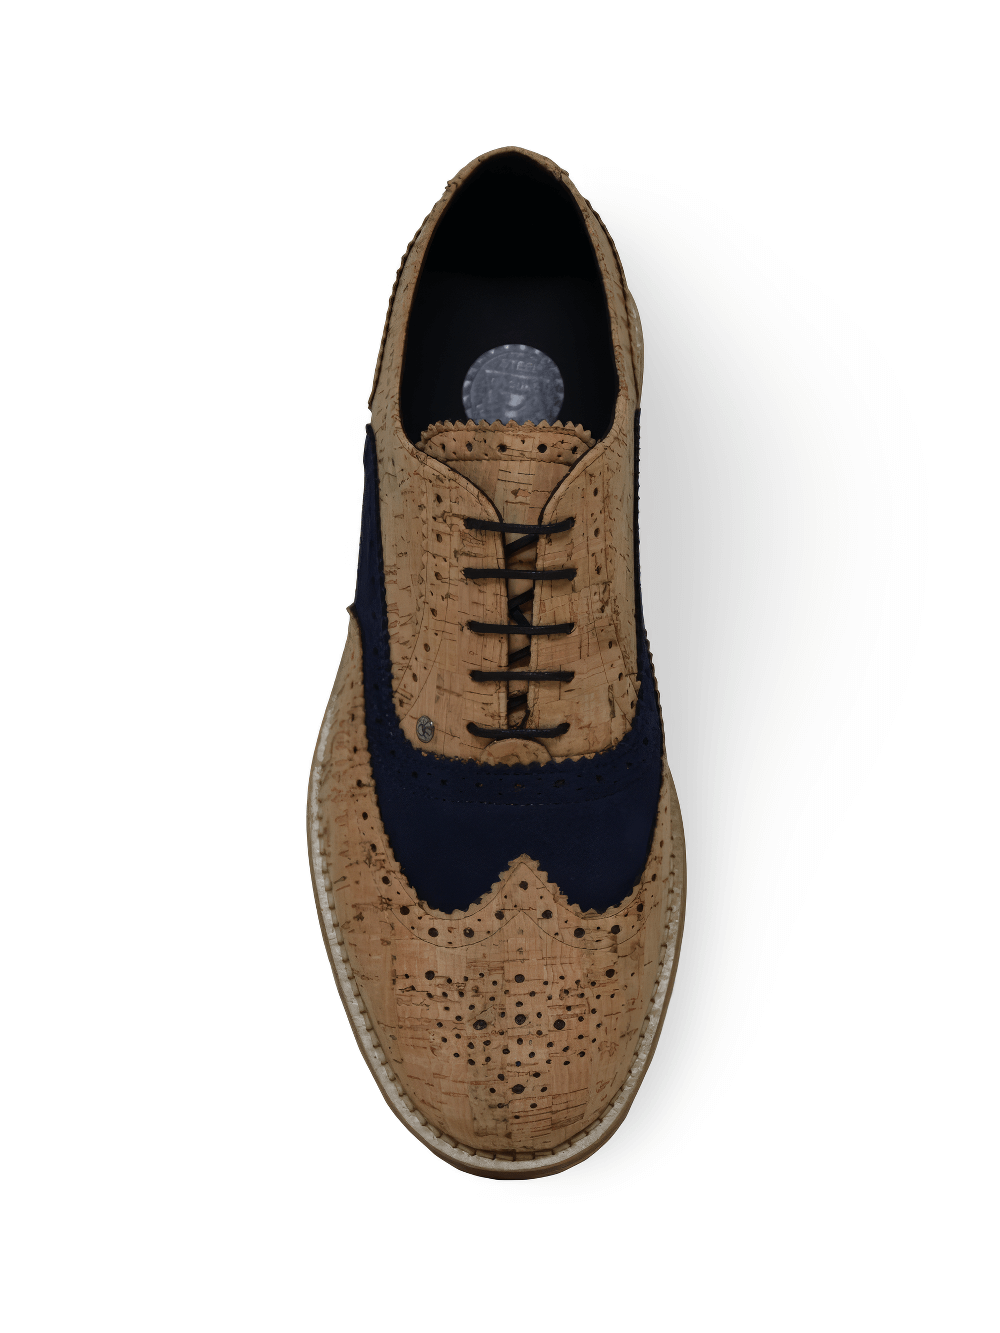 Men's Sleek Beige and Navy Cork Oxford Lace-up Shoes